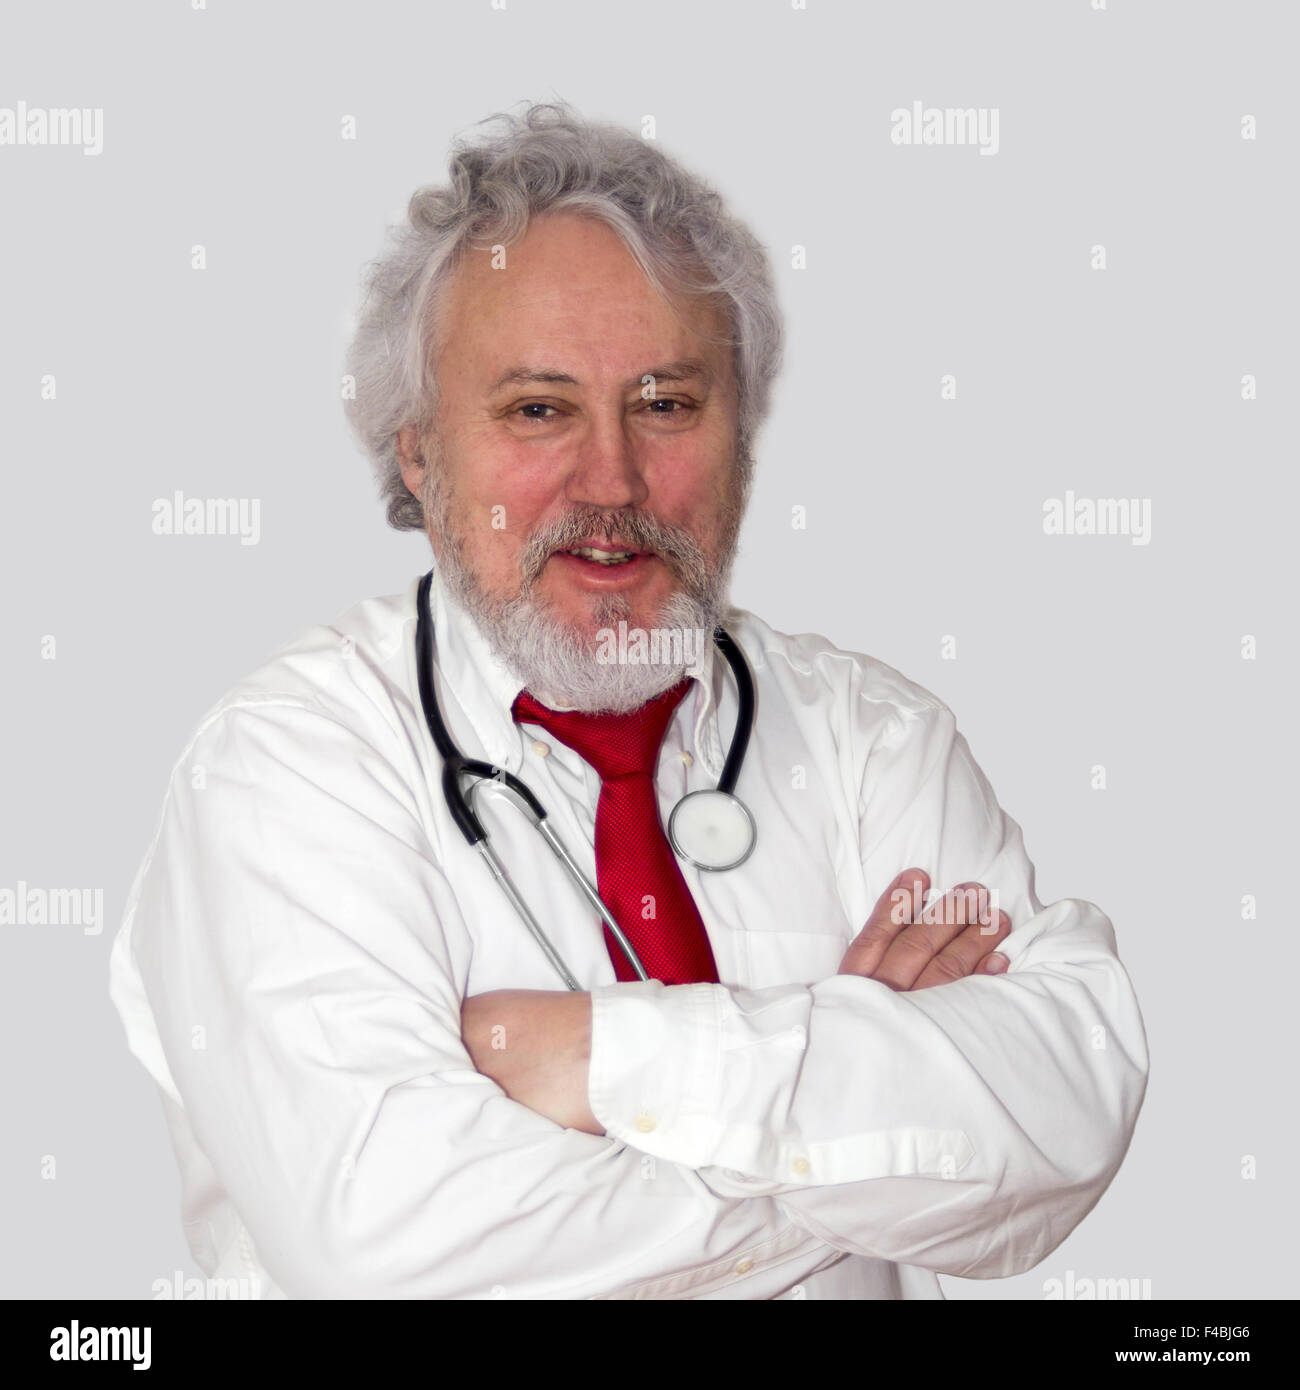 Experienced doctor Stock Photo